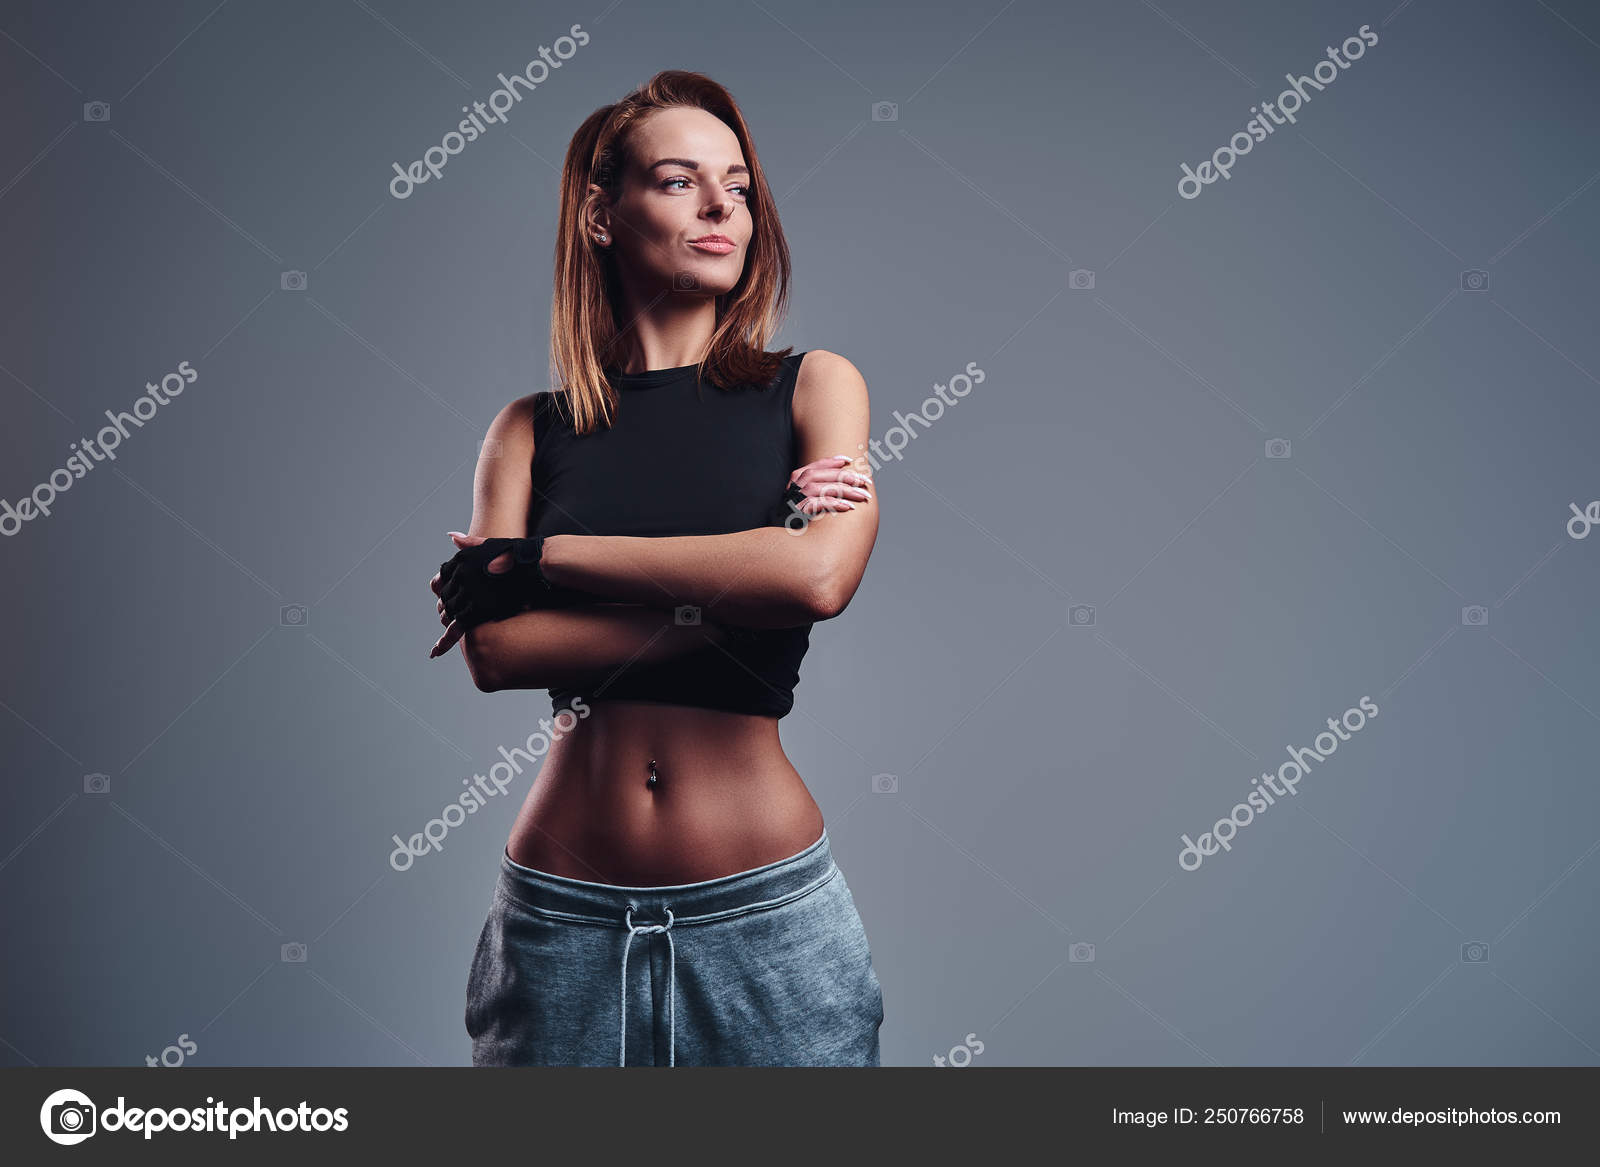 Confident Young Fit Woman In Sportswear Posing Free Stock Photo